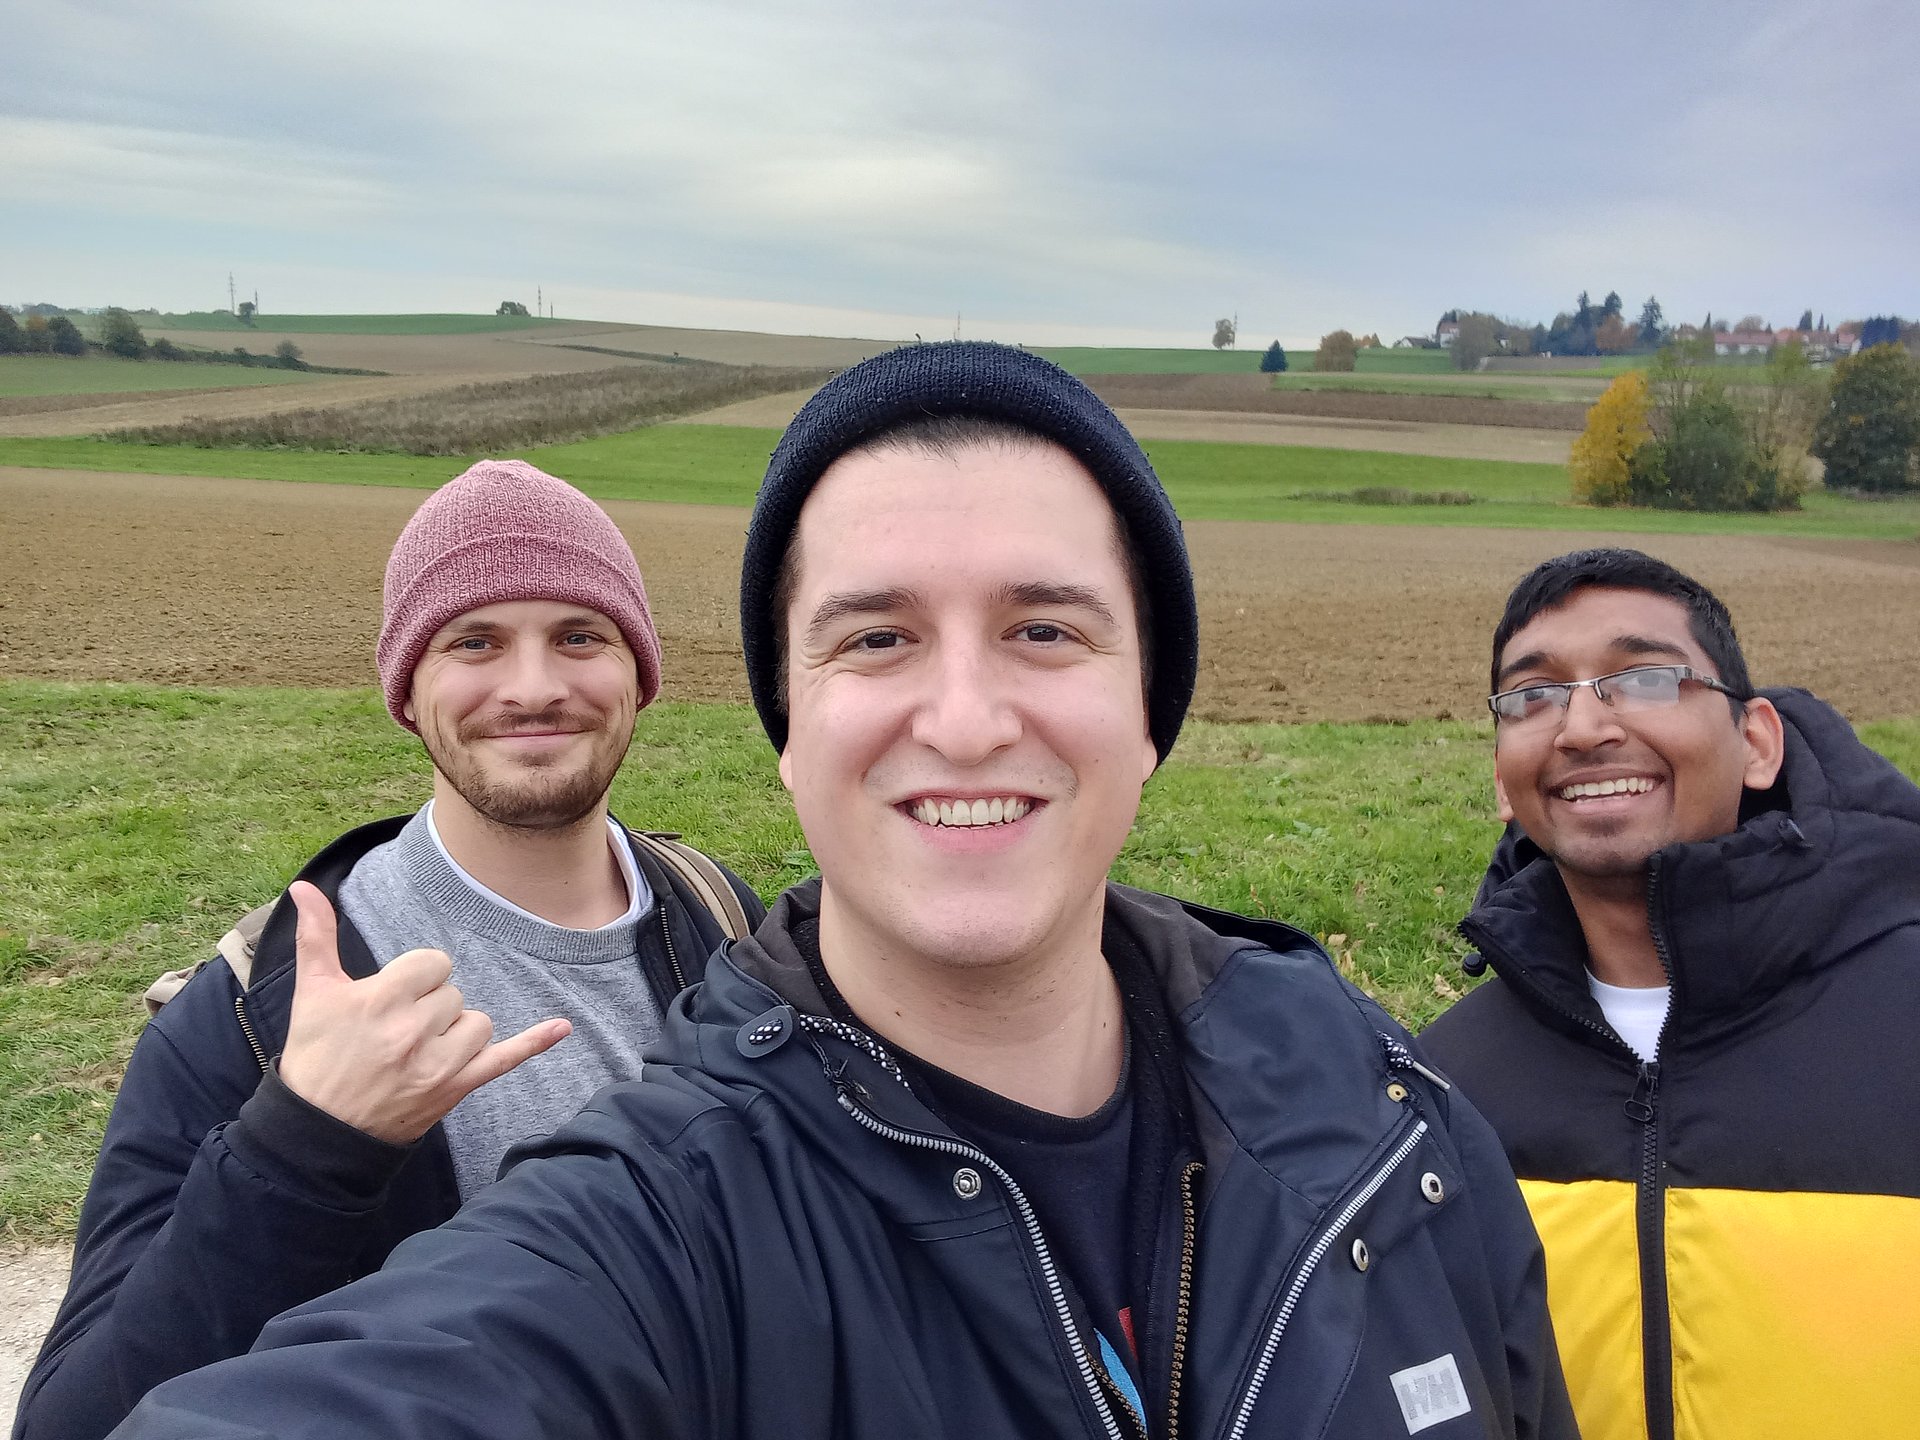 The three young founders of “RAISE Agriculture” (from left to right): Magnus Baumann, James Specker and Abir Bhattacharyya.